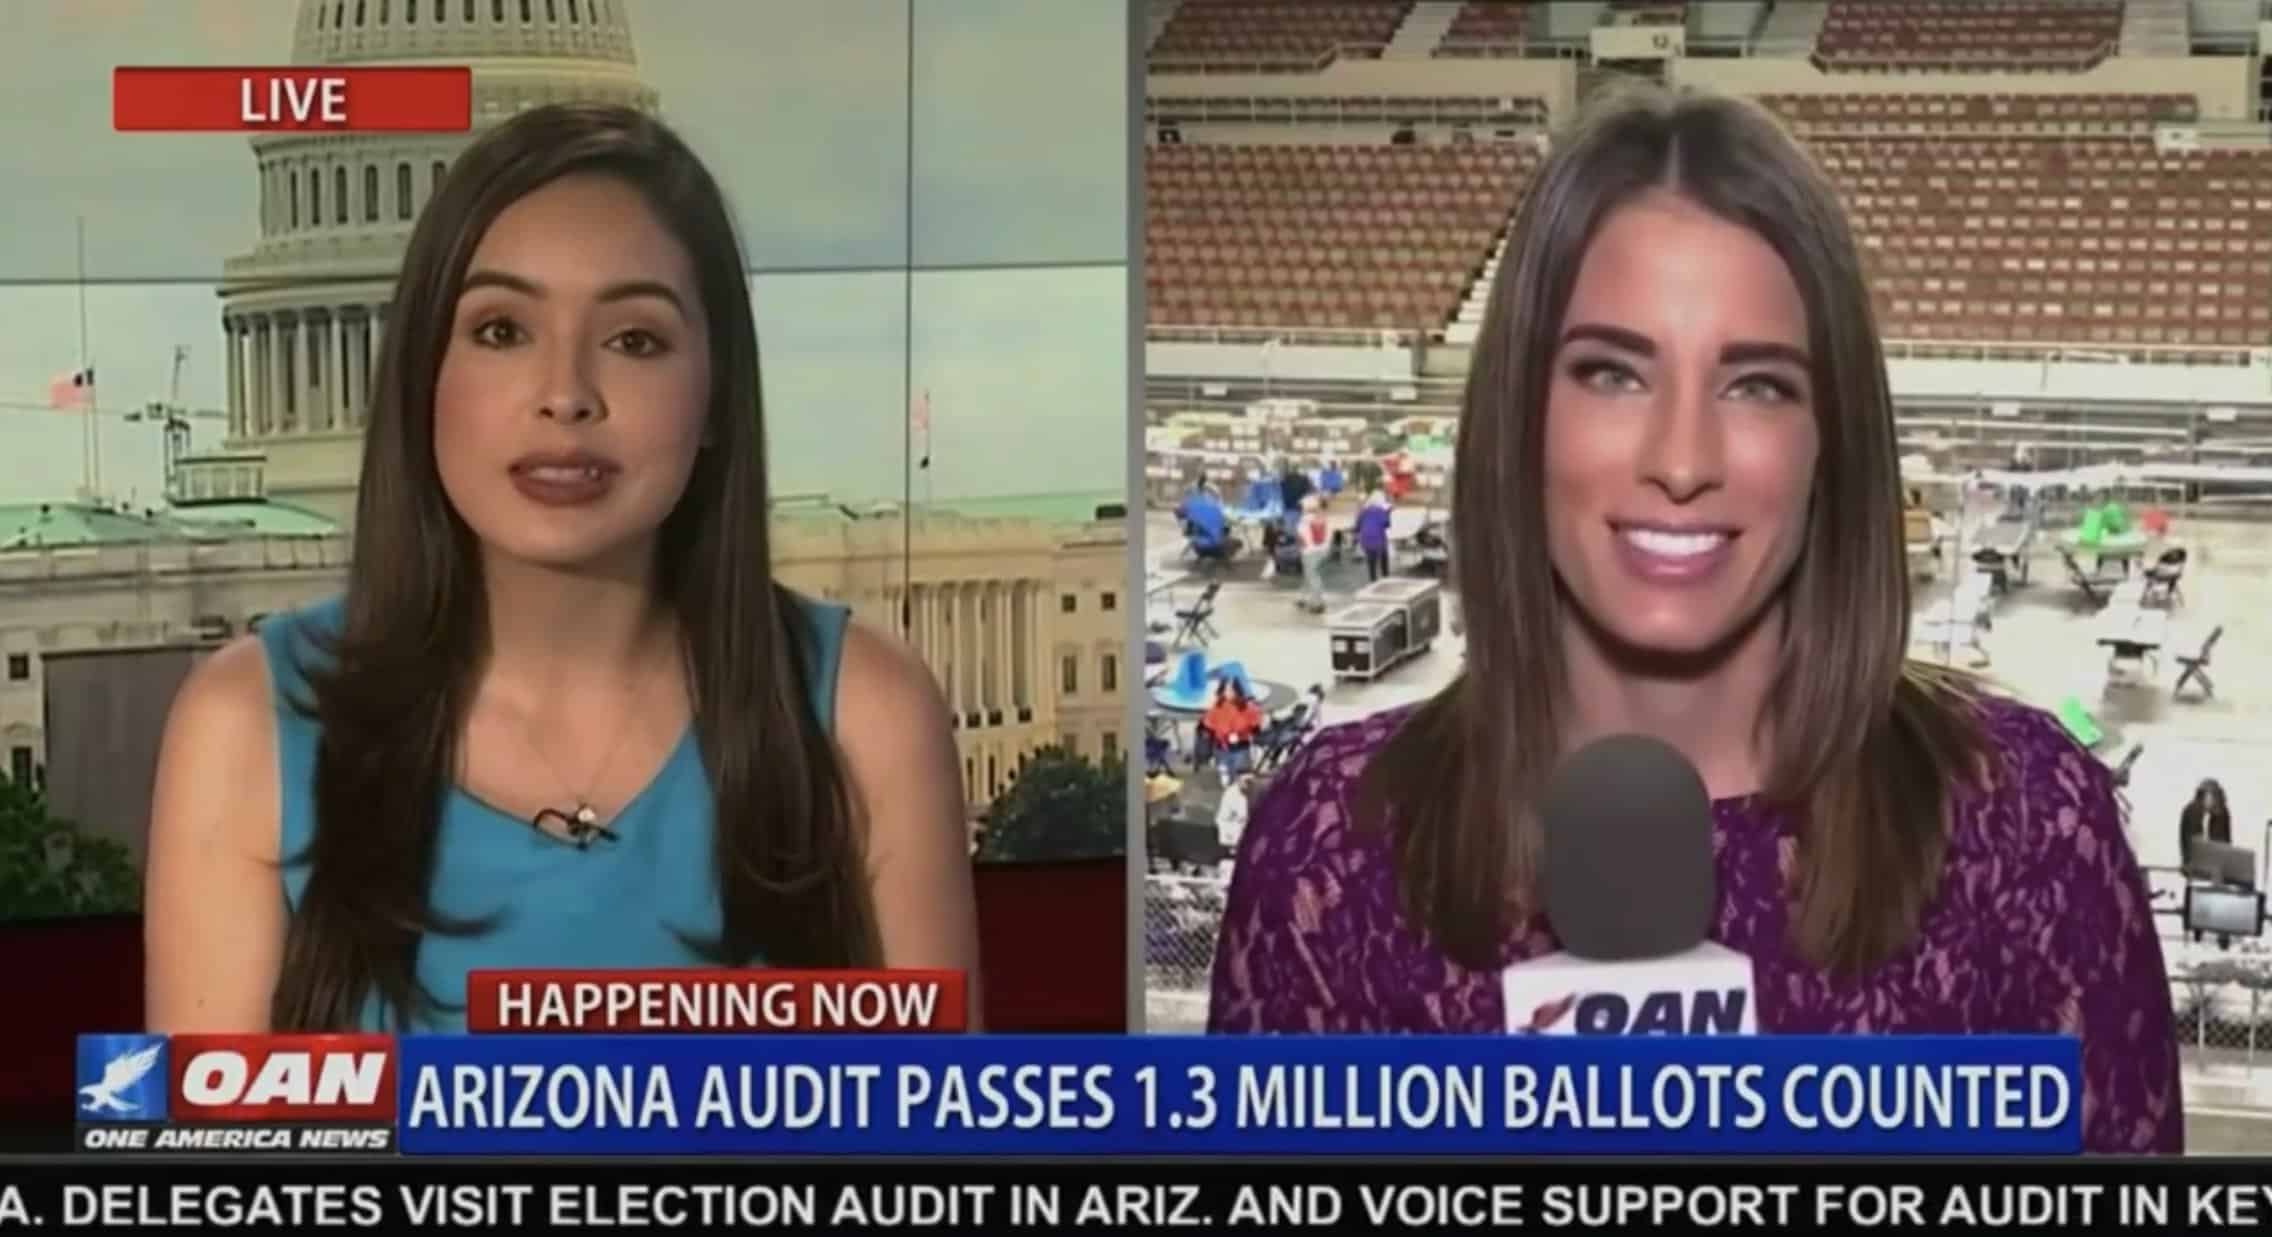 MORE ARIZONA AUDIT UPDATES: OVER 60% Of Ballots Counted and
Analyzed — 1.3 Million Completed! 1